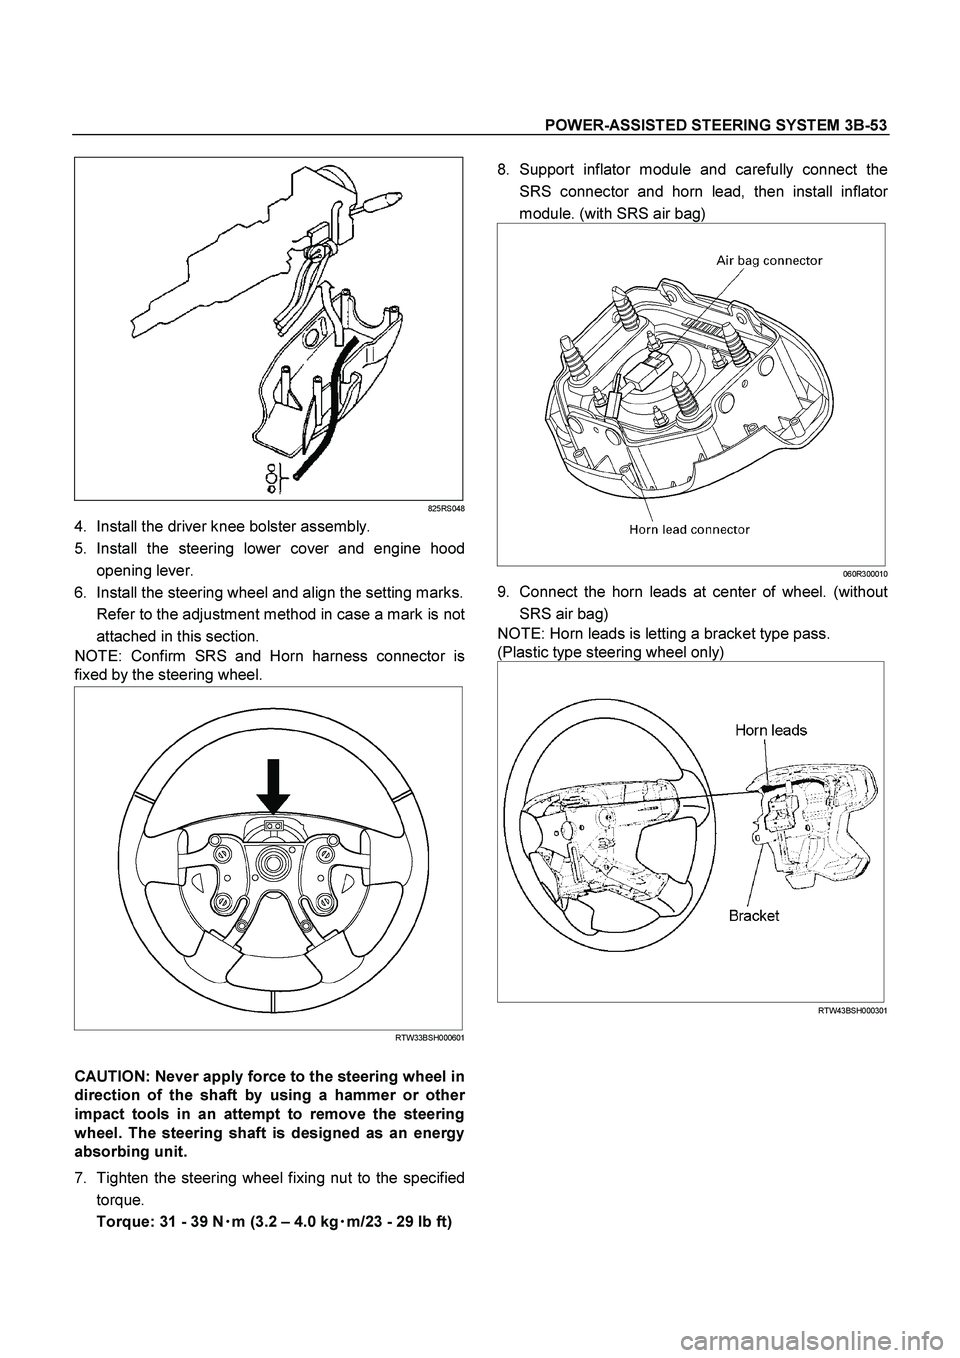 ISUZU TF SERIES 2004 Repair Manual POWER-ASSISTED STEERING SYSTEM 3B-53
 
825RS048
4.  Install the driver knee bolster assembly. 
5. Install the steering lower cover and engine hood
opening lever. 
6.  Install the steering wheel and al